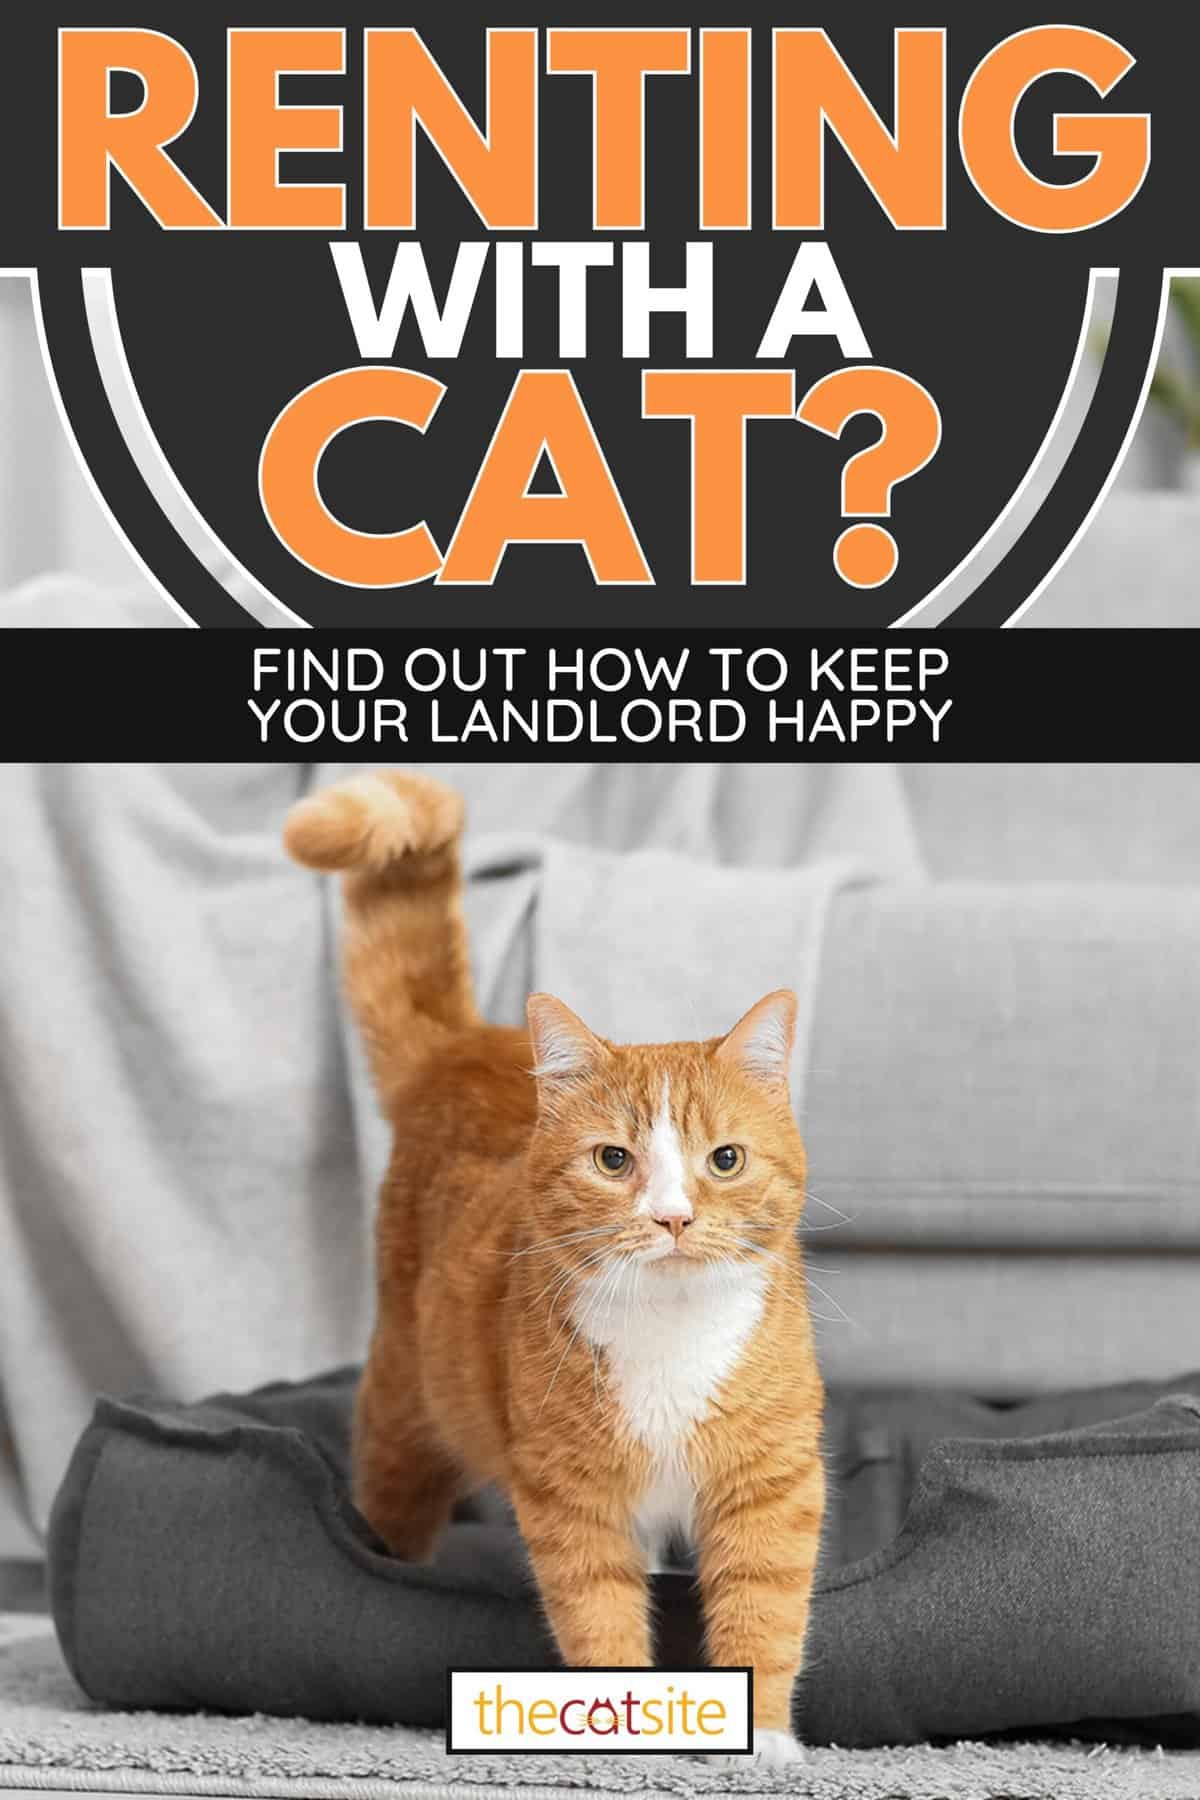 Cute red cat in pet bed near sofa, Renting With A Cat? Find Out How To Keep Your Landlord Happy